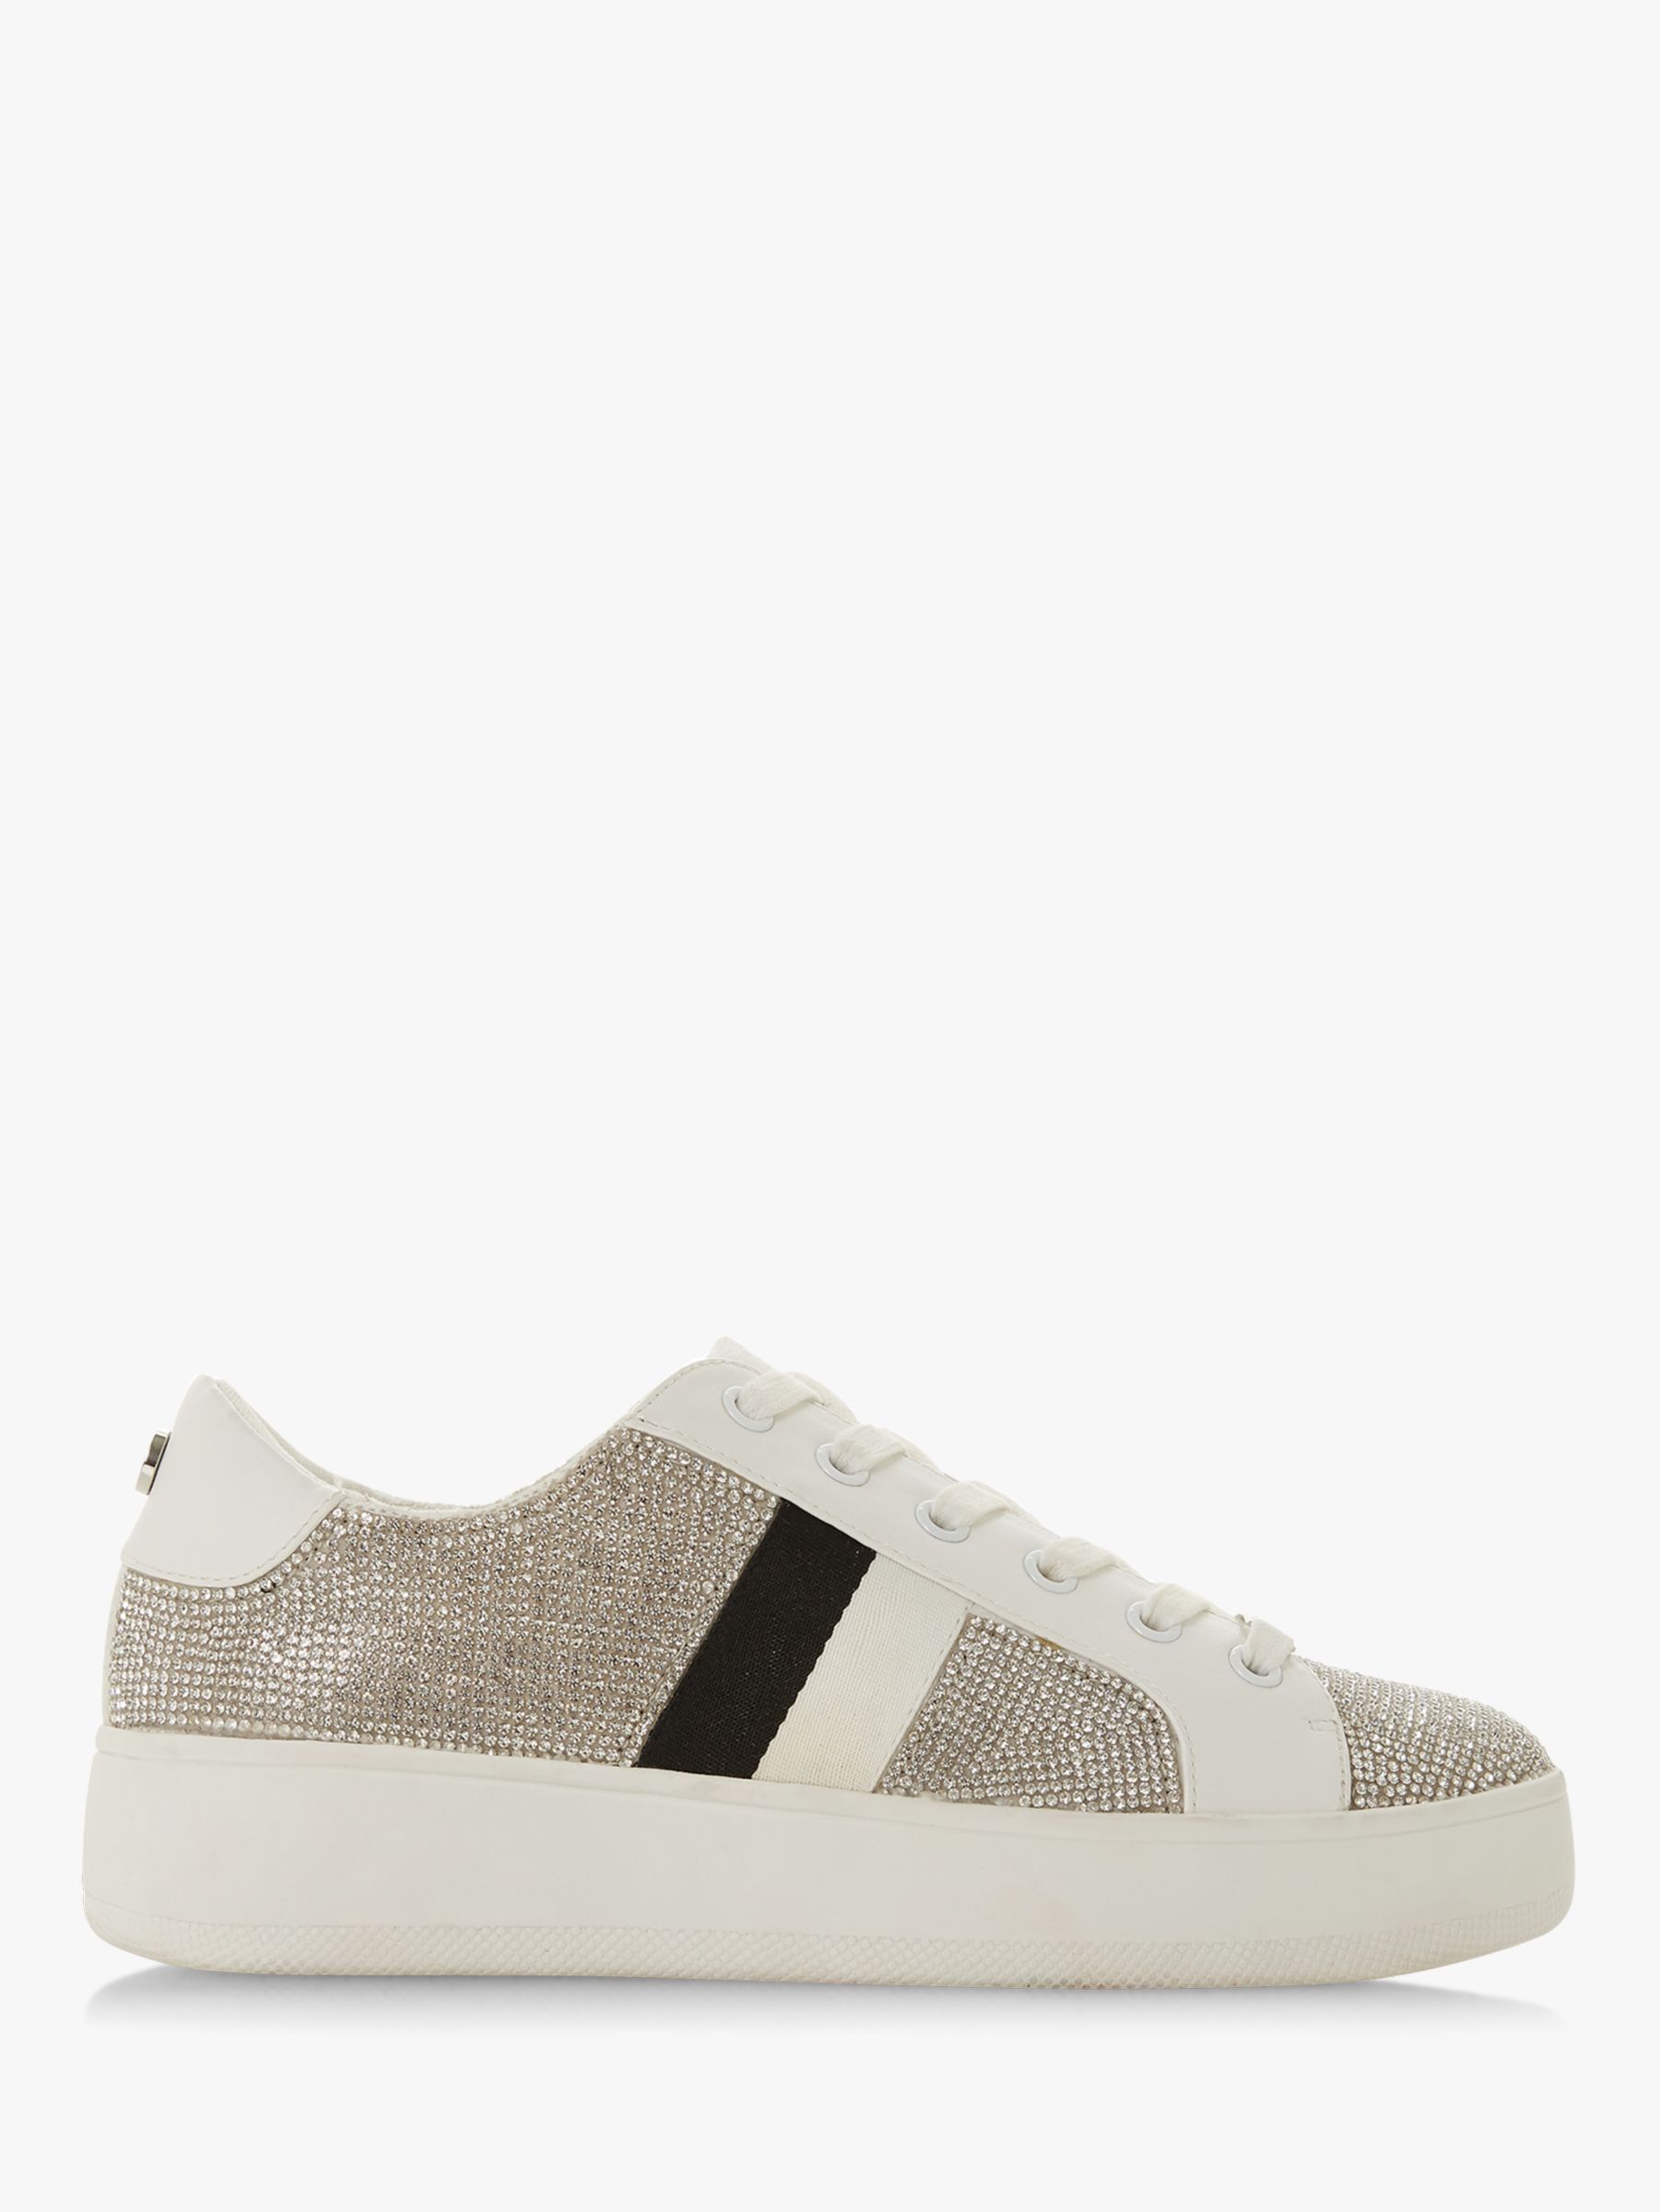 Steve Madden Belle-R Embellished Lace Up Trainers, Silver Diamante